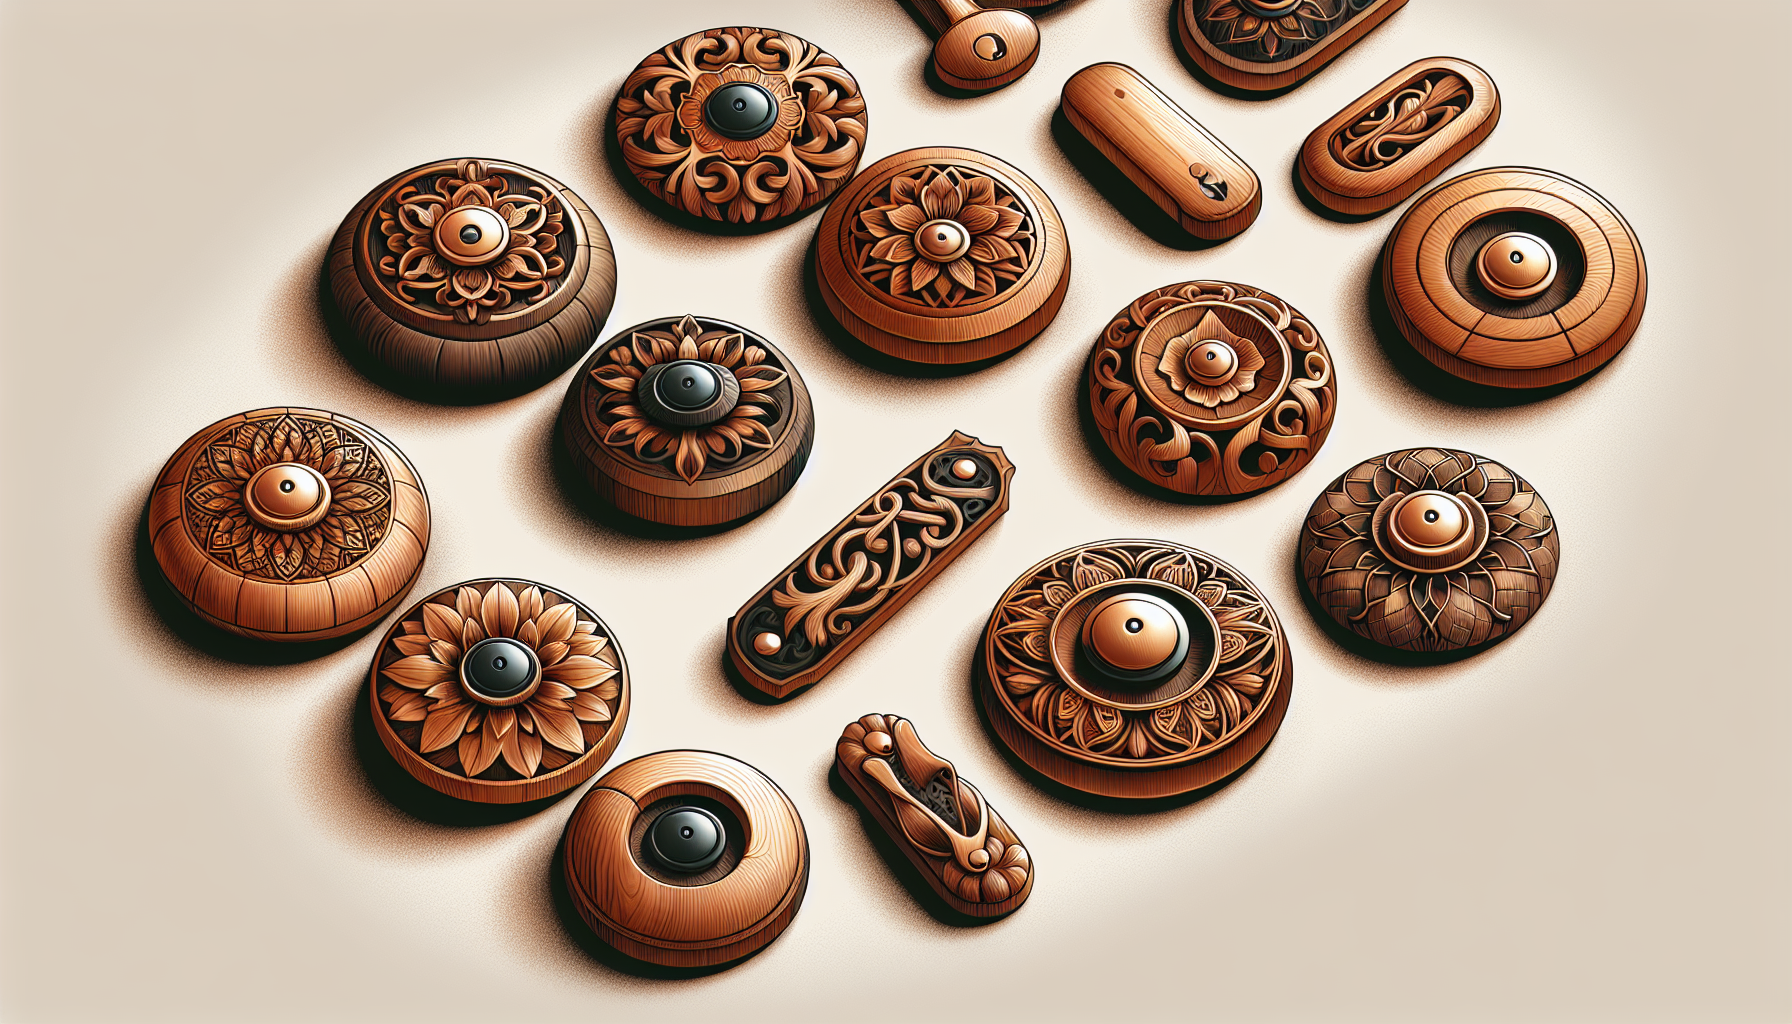 Chic magnetic wood doorbells as home gifts